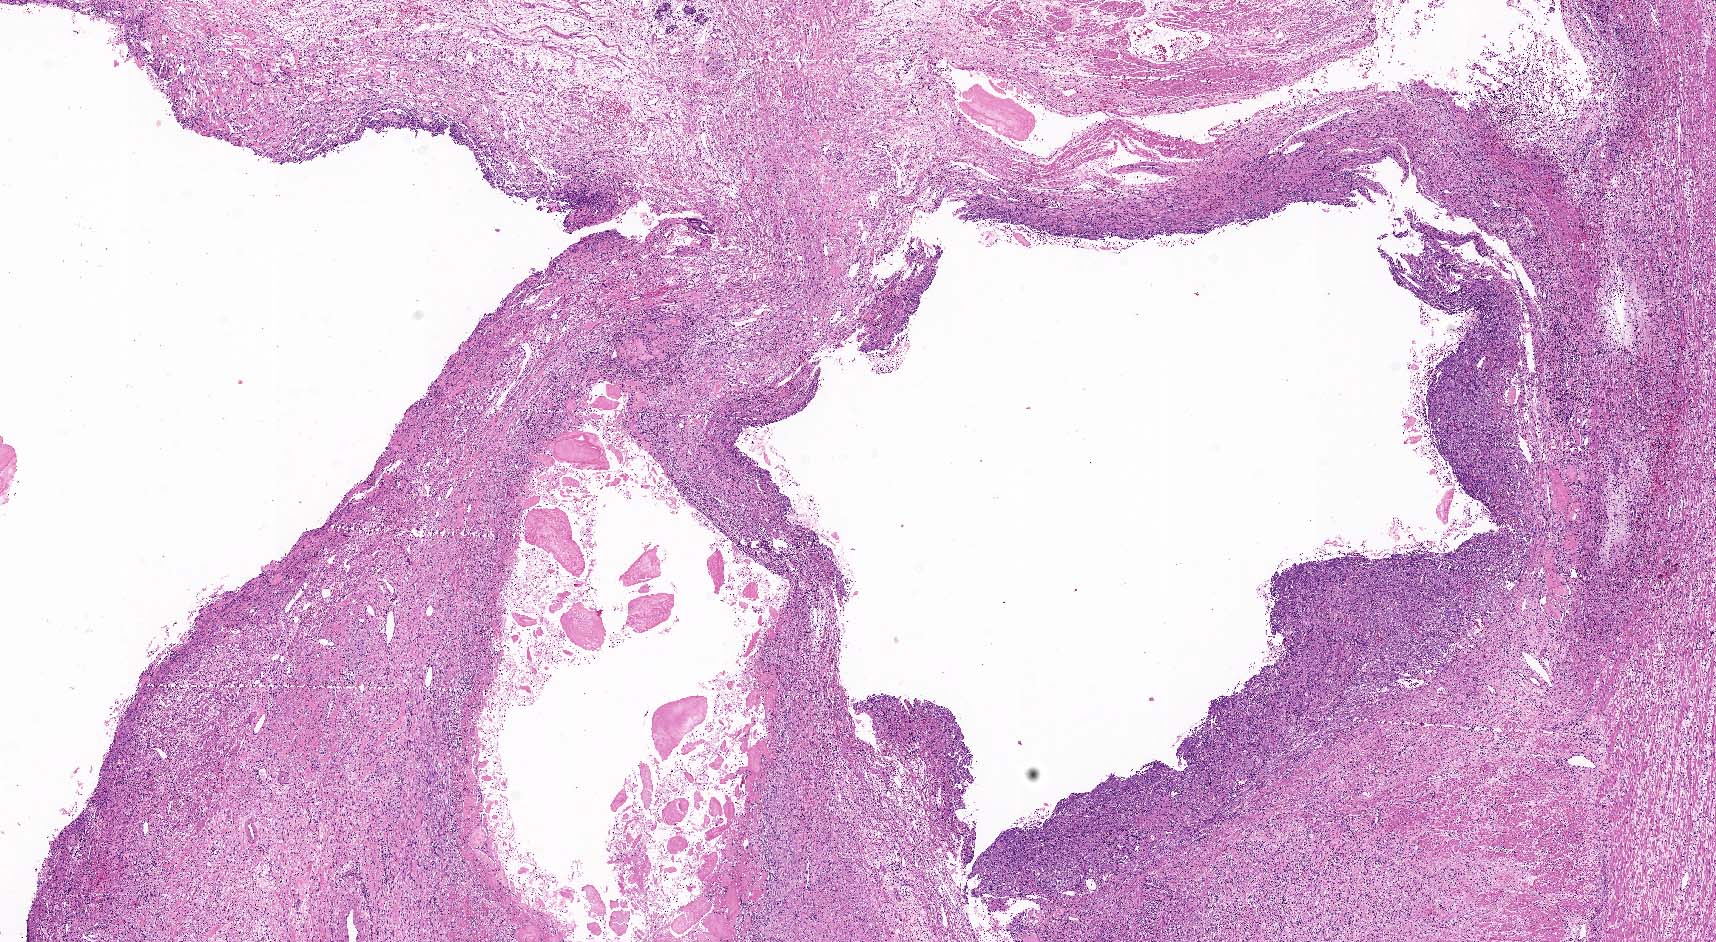 Inflammation of pseudocyst wall